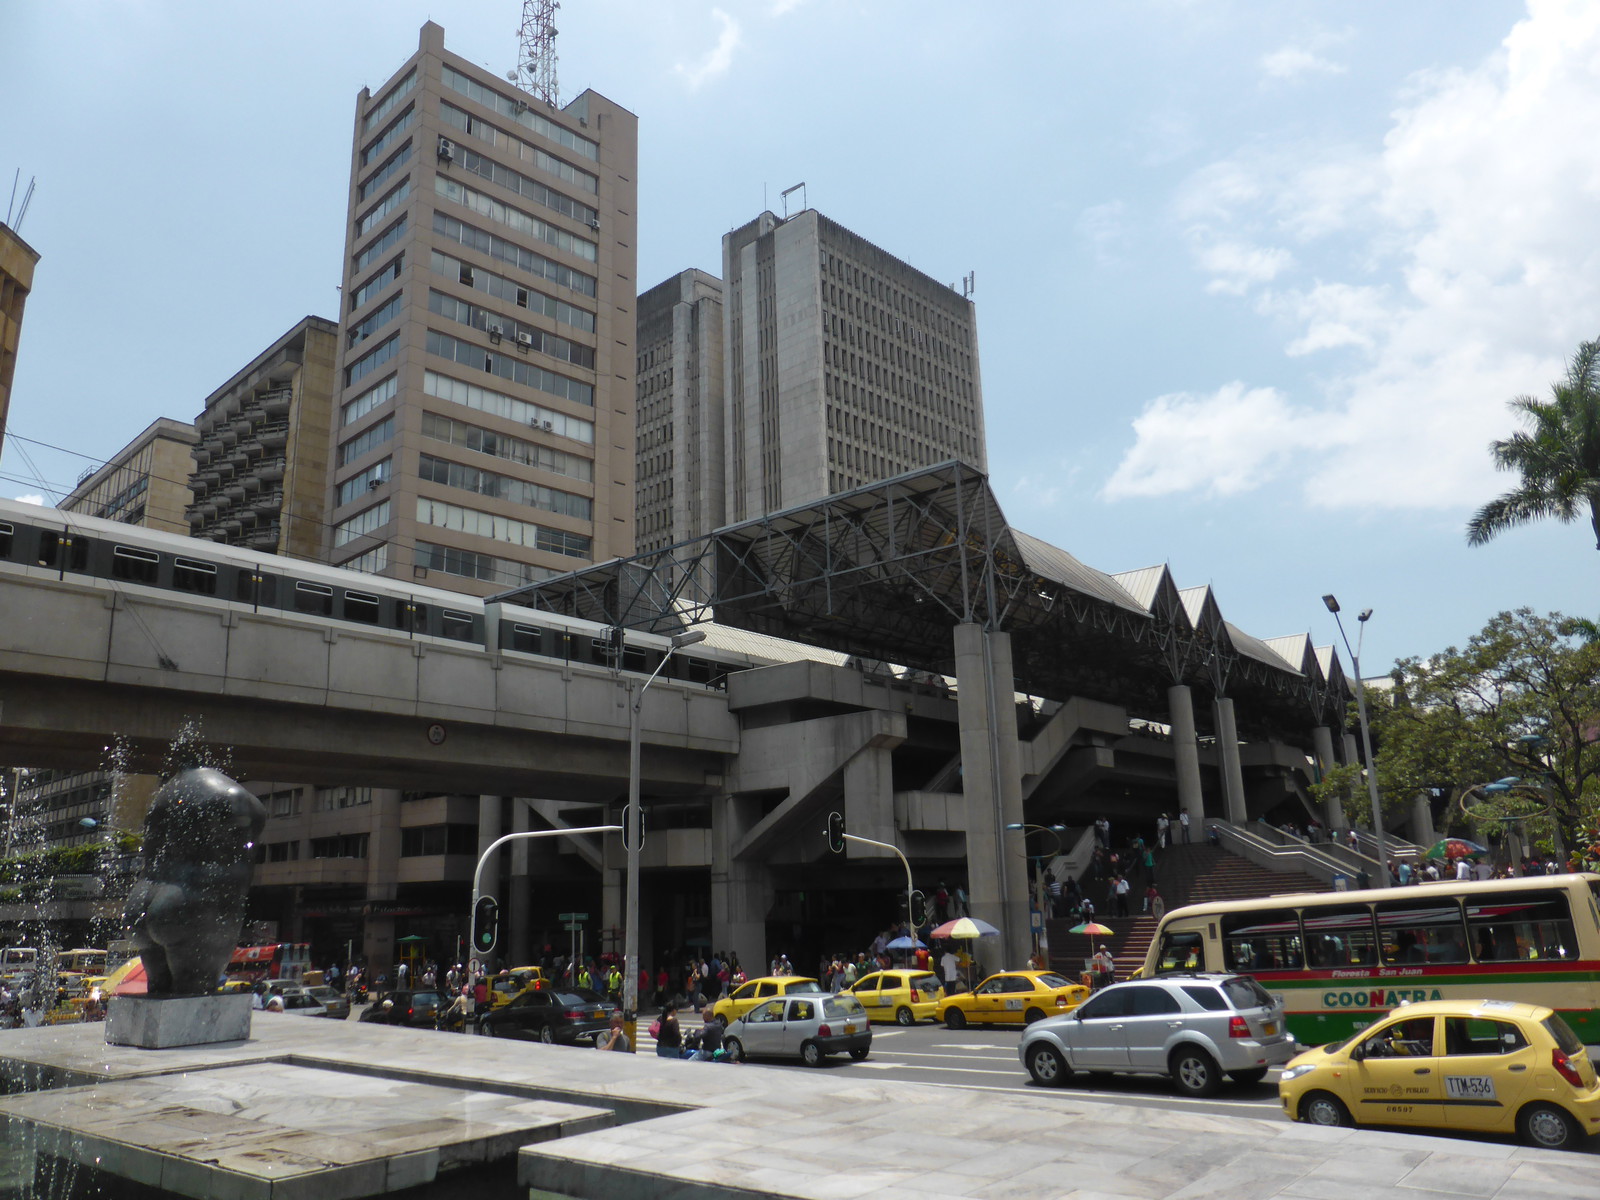 The Metro dominates the western side of Parque Berrío